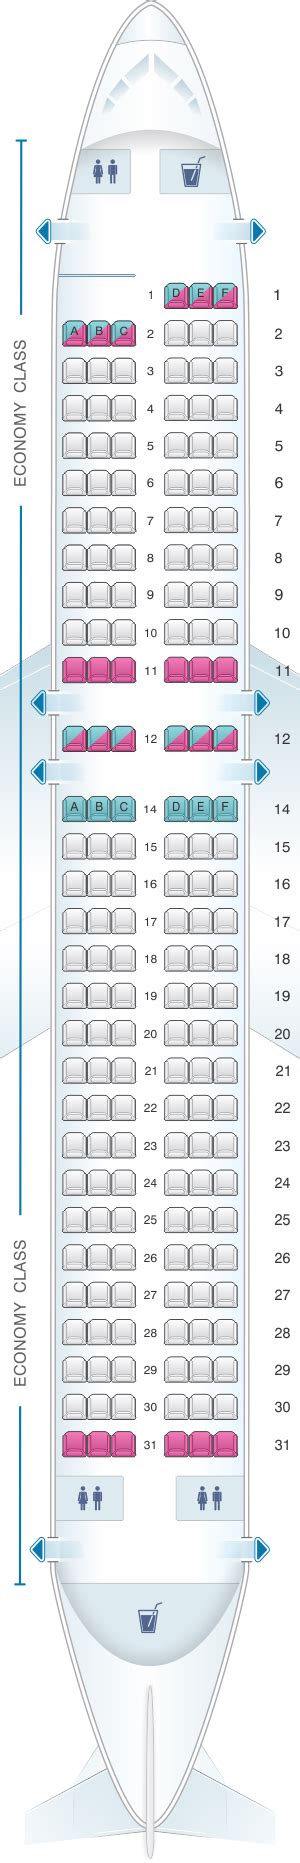 All Allegiant flights feature comfortable, assigned leather seats. For a nominal fee, you can select your seat at the time of reservation, guaranteeing your comfort and location onboard your flight. If you're traveling with a companion, ensure you sit together. If you qualify, you can even book an exit row with increased leg room. . 